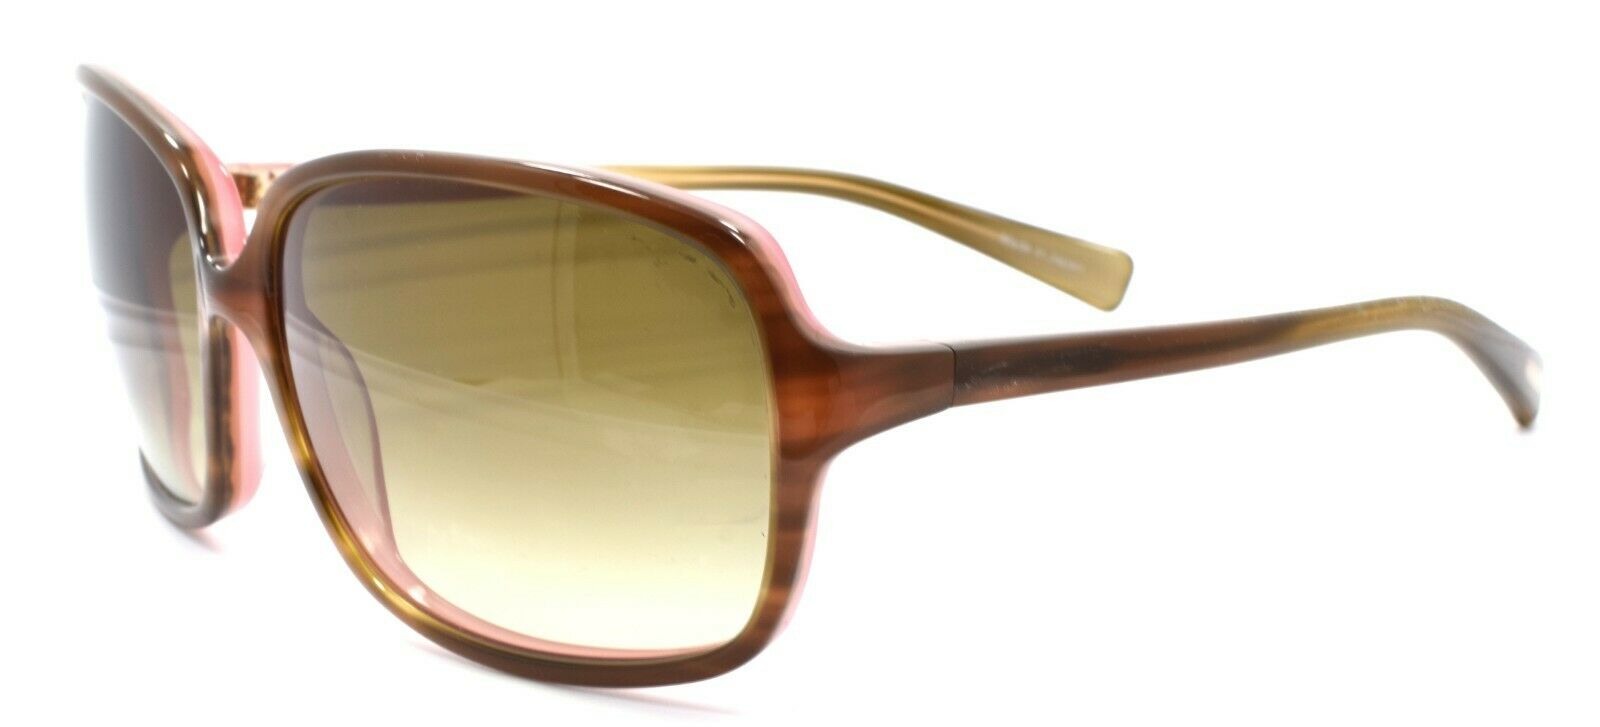 1-Oliver Peoples Bacall OTPI Women's Sunglasses Brown Over Pink / Green JAPAN-Does not apply-IKSpecs